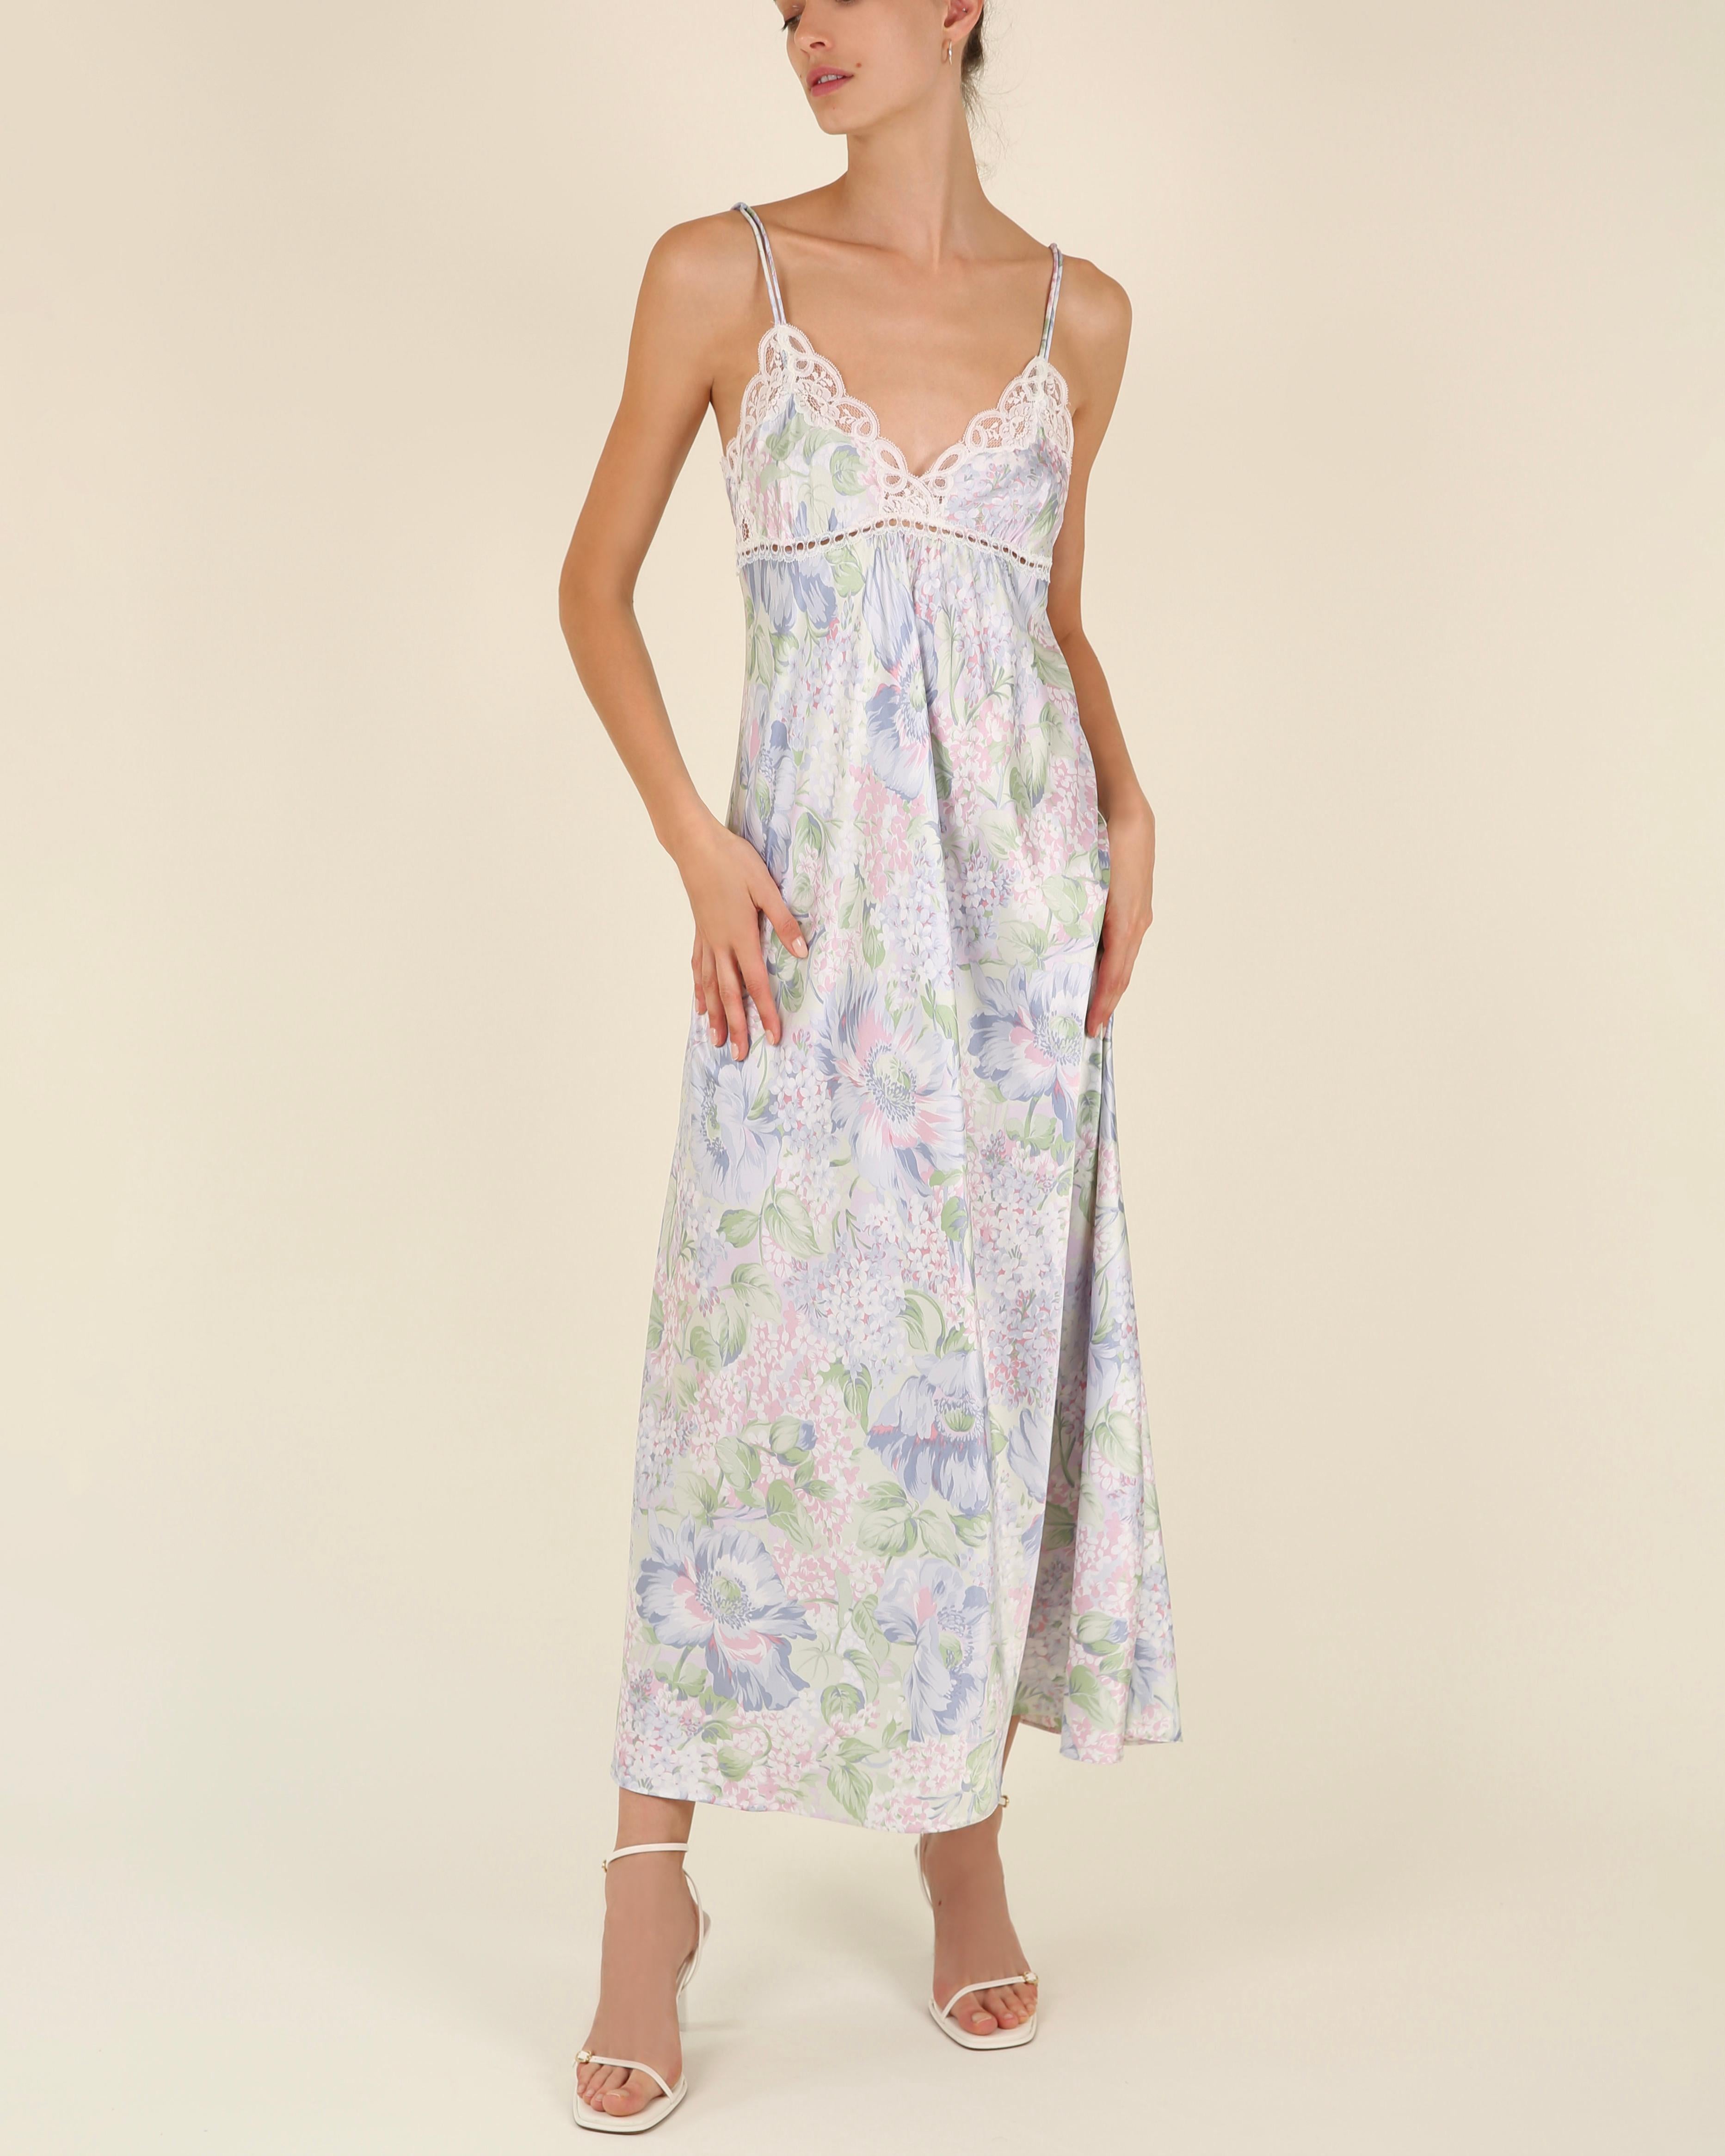 LOVE LALI Vintage

A very pretty vintage Christian Dior Lingerie night gown that works perfectly worn as a slip dress with a pair of high heels or sandals
Beautifully silky flowing satin fabric with floral print in the most gorgeous pastel shades of